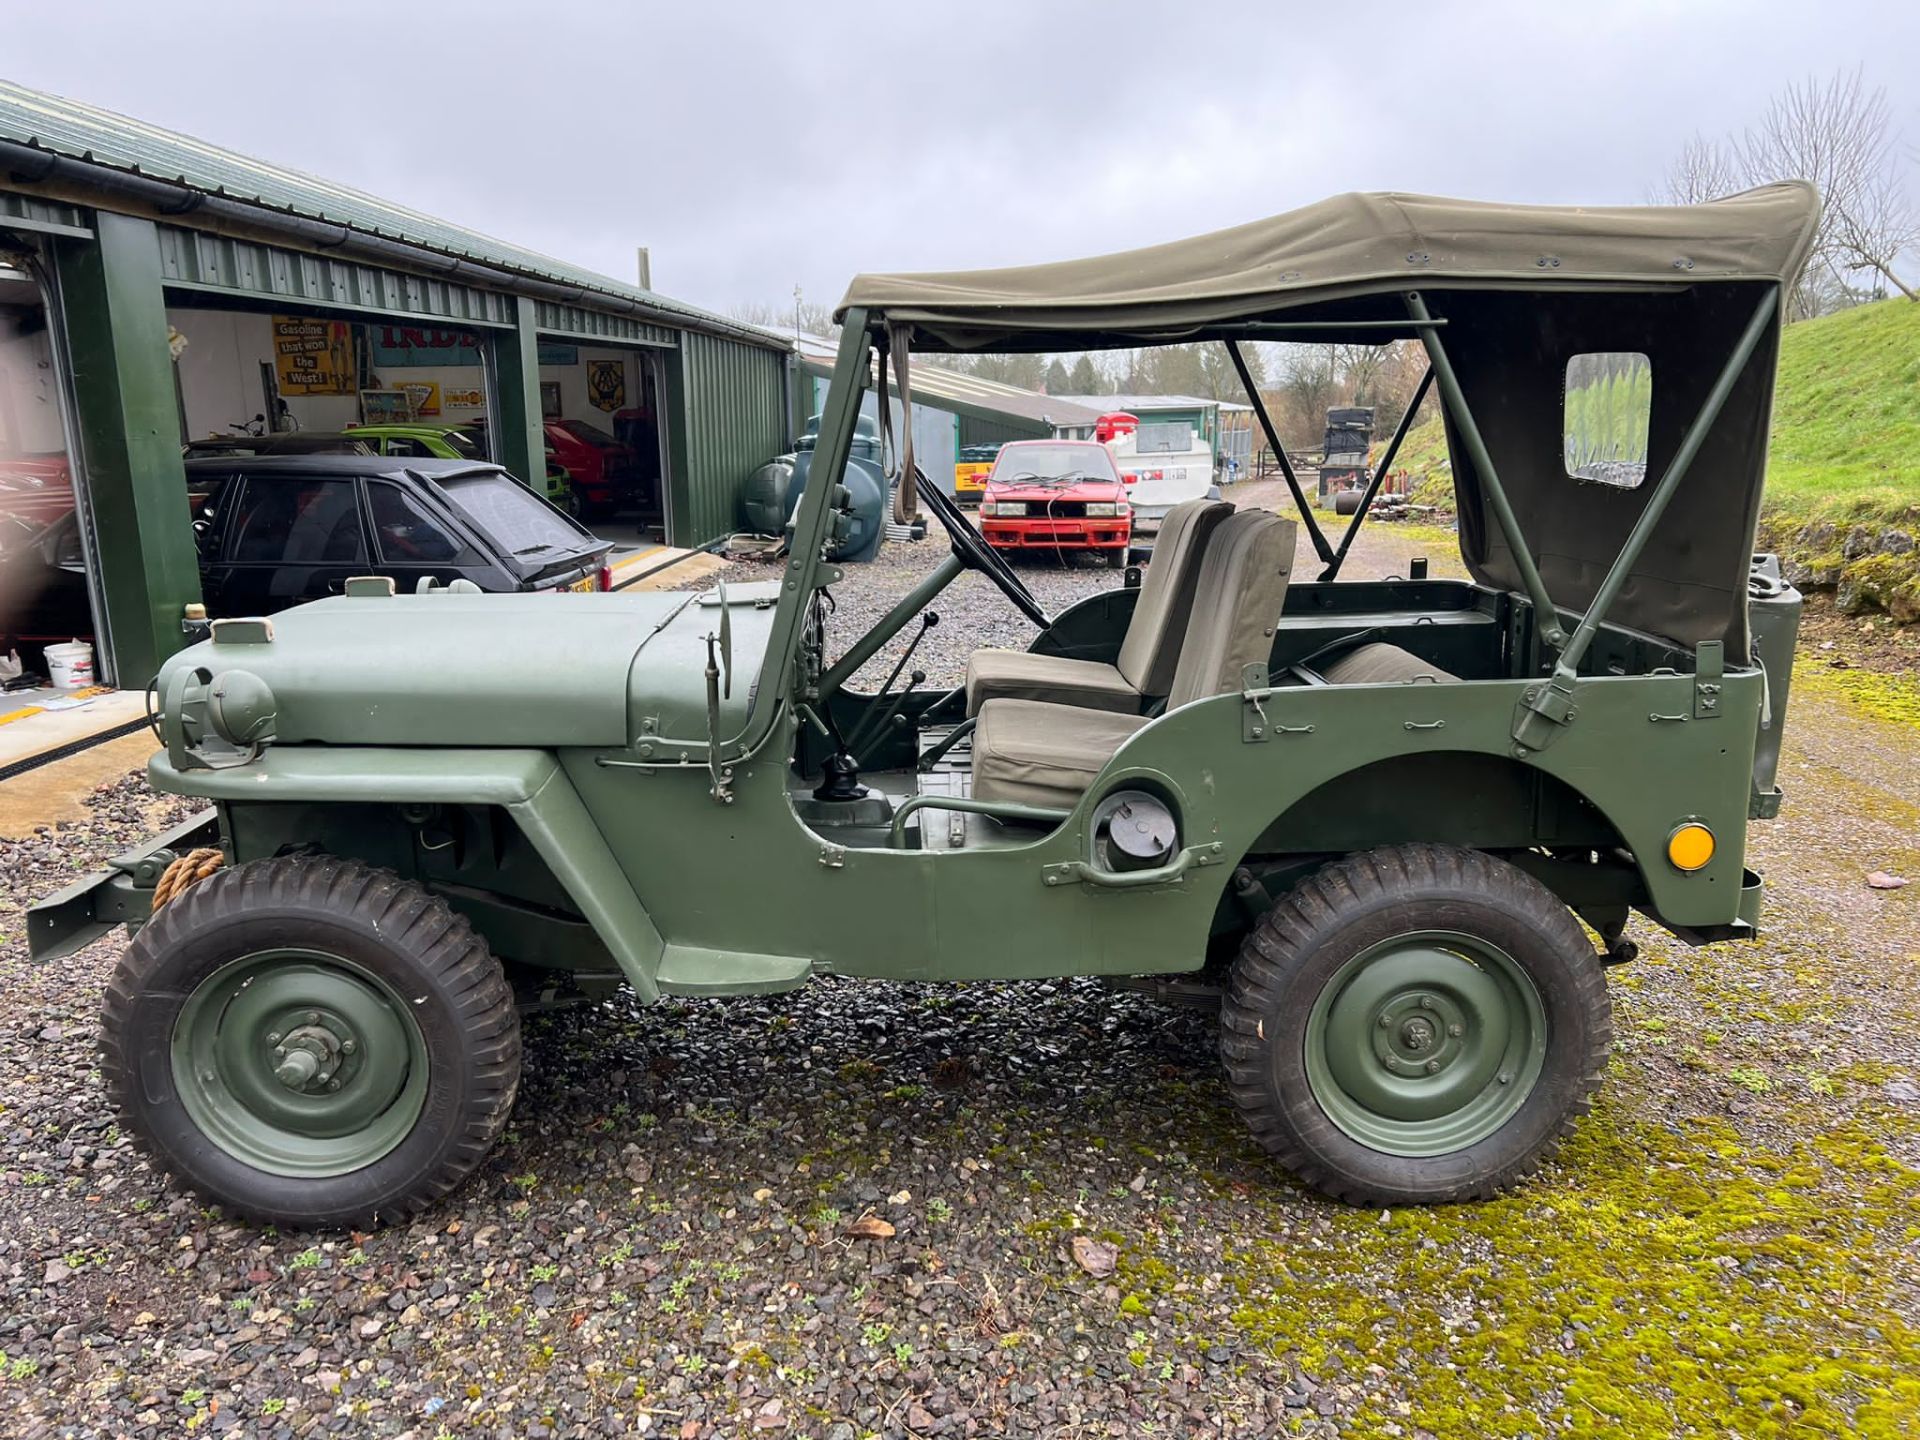 1945 Willys Jeep - Military Vehicle - Restored and raring to go... - Bild 6 aus 13